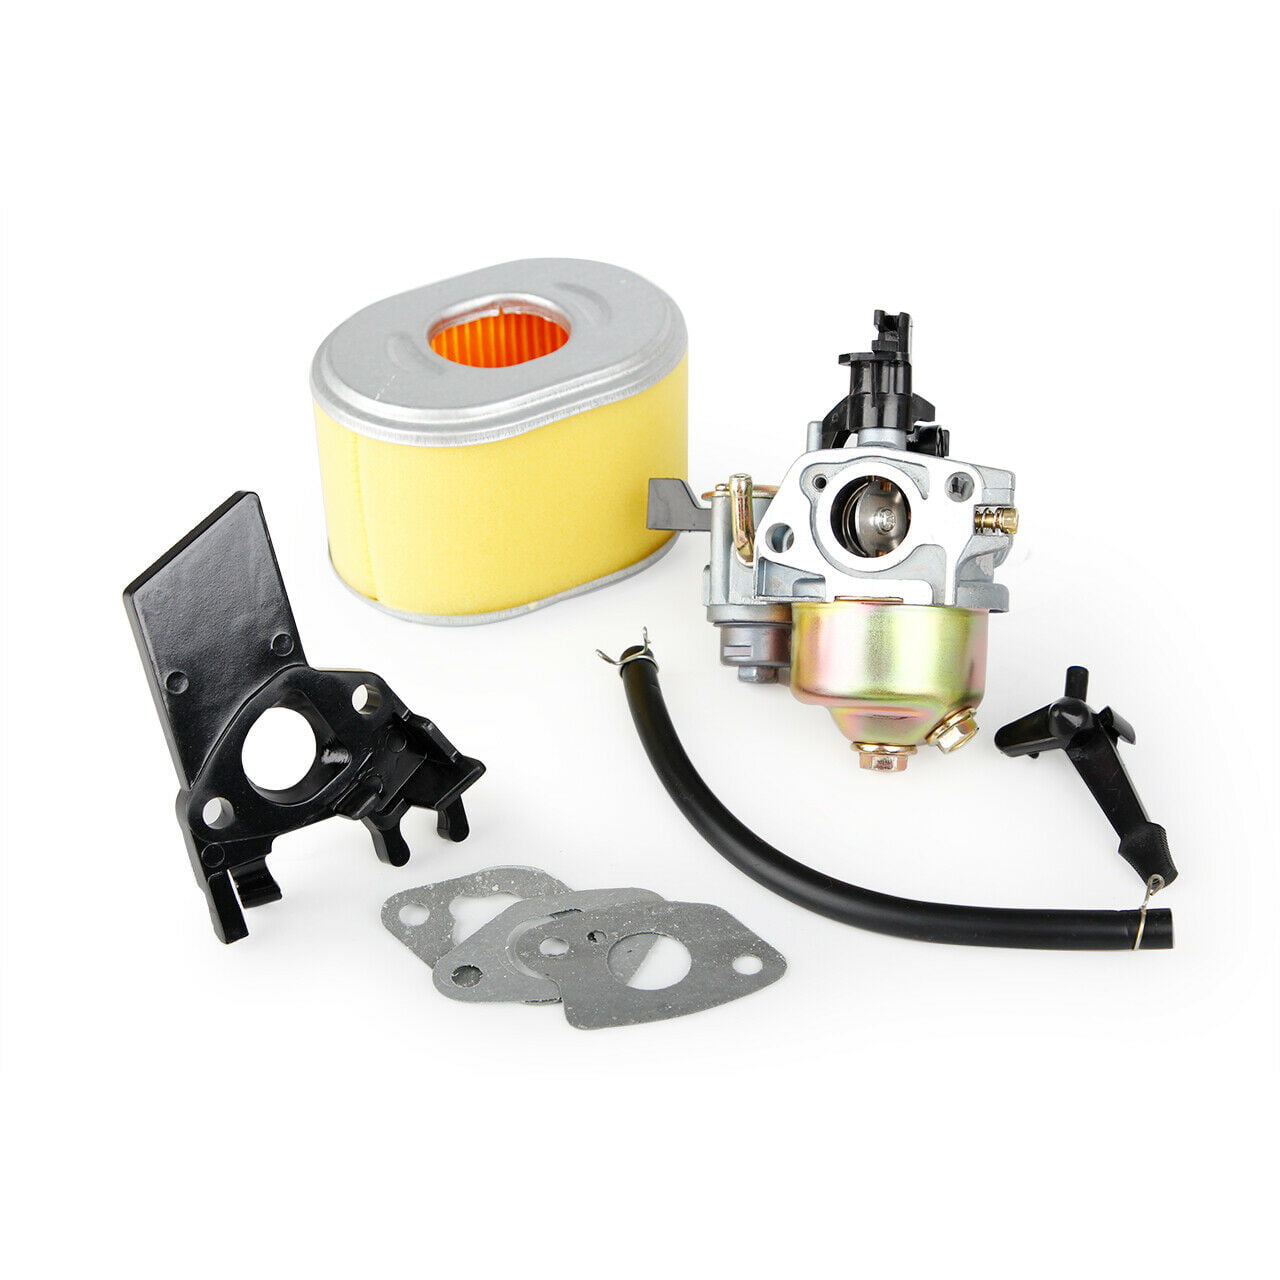 Details about   Inlet Air Filter Kit for Go Karts Mini Bikes w/ 212cc 6.5HP Predator Engine New 